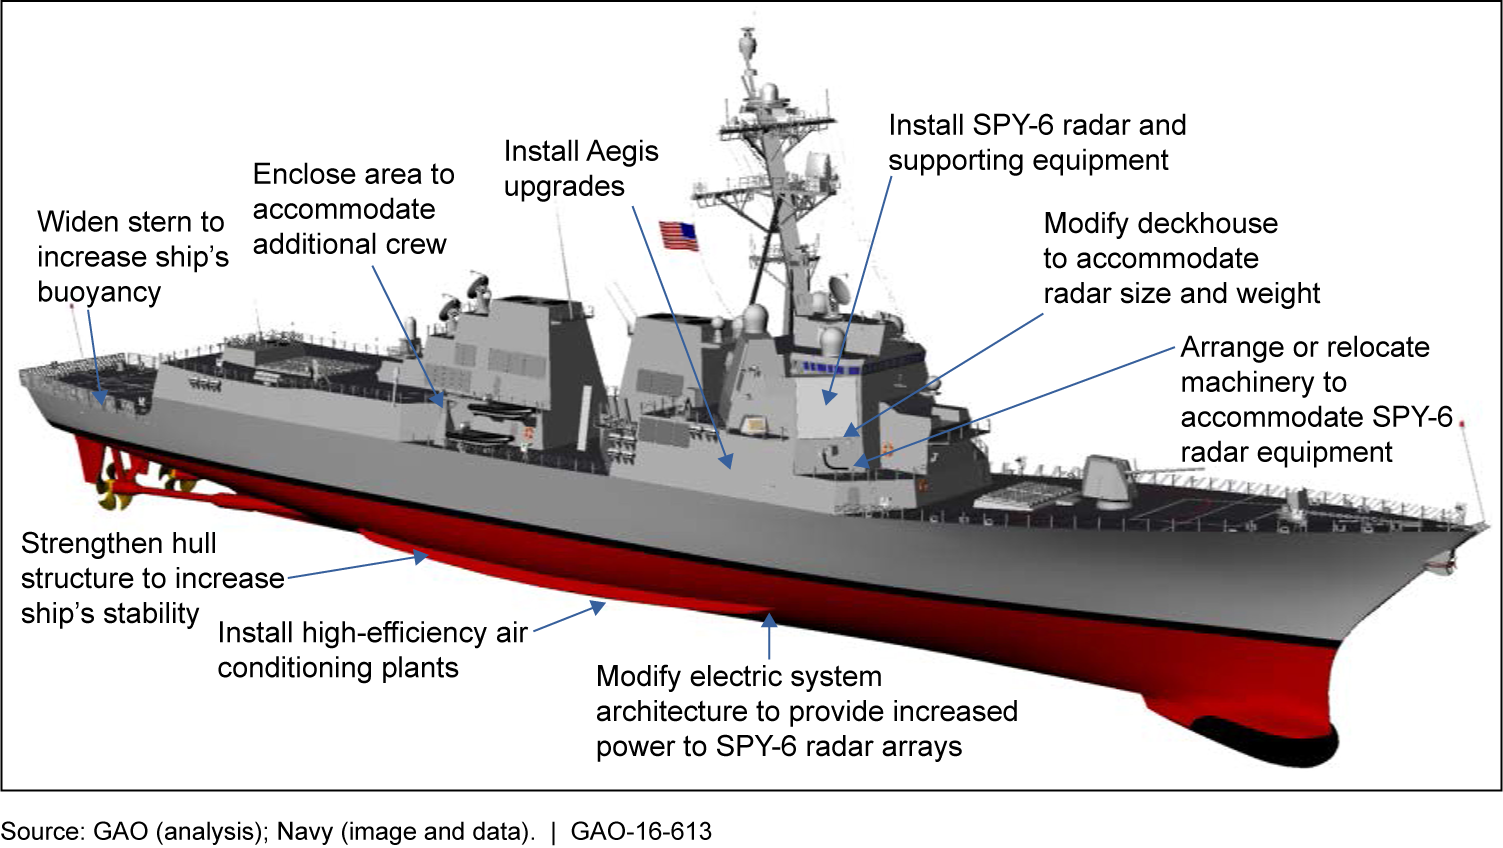 Flight III Ship Configuration Changes Related to SPY-6 Radar Introduction